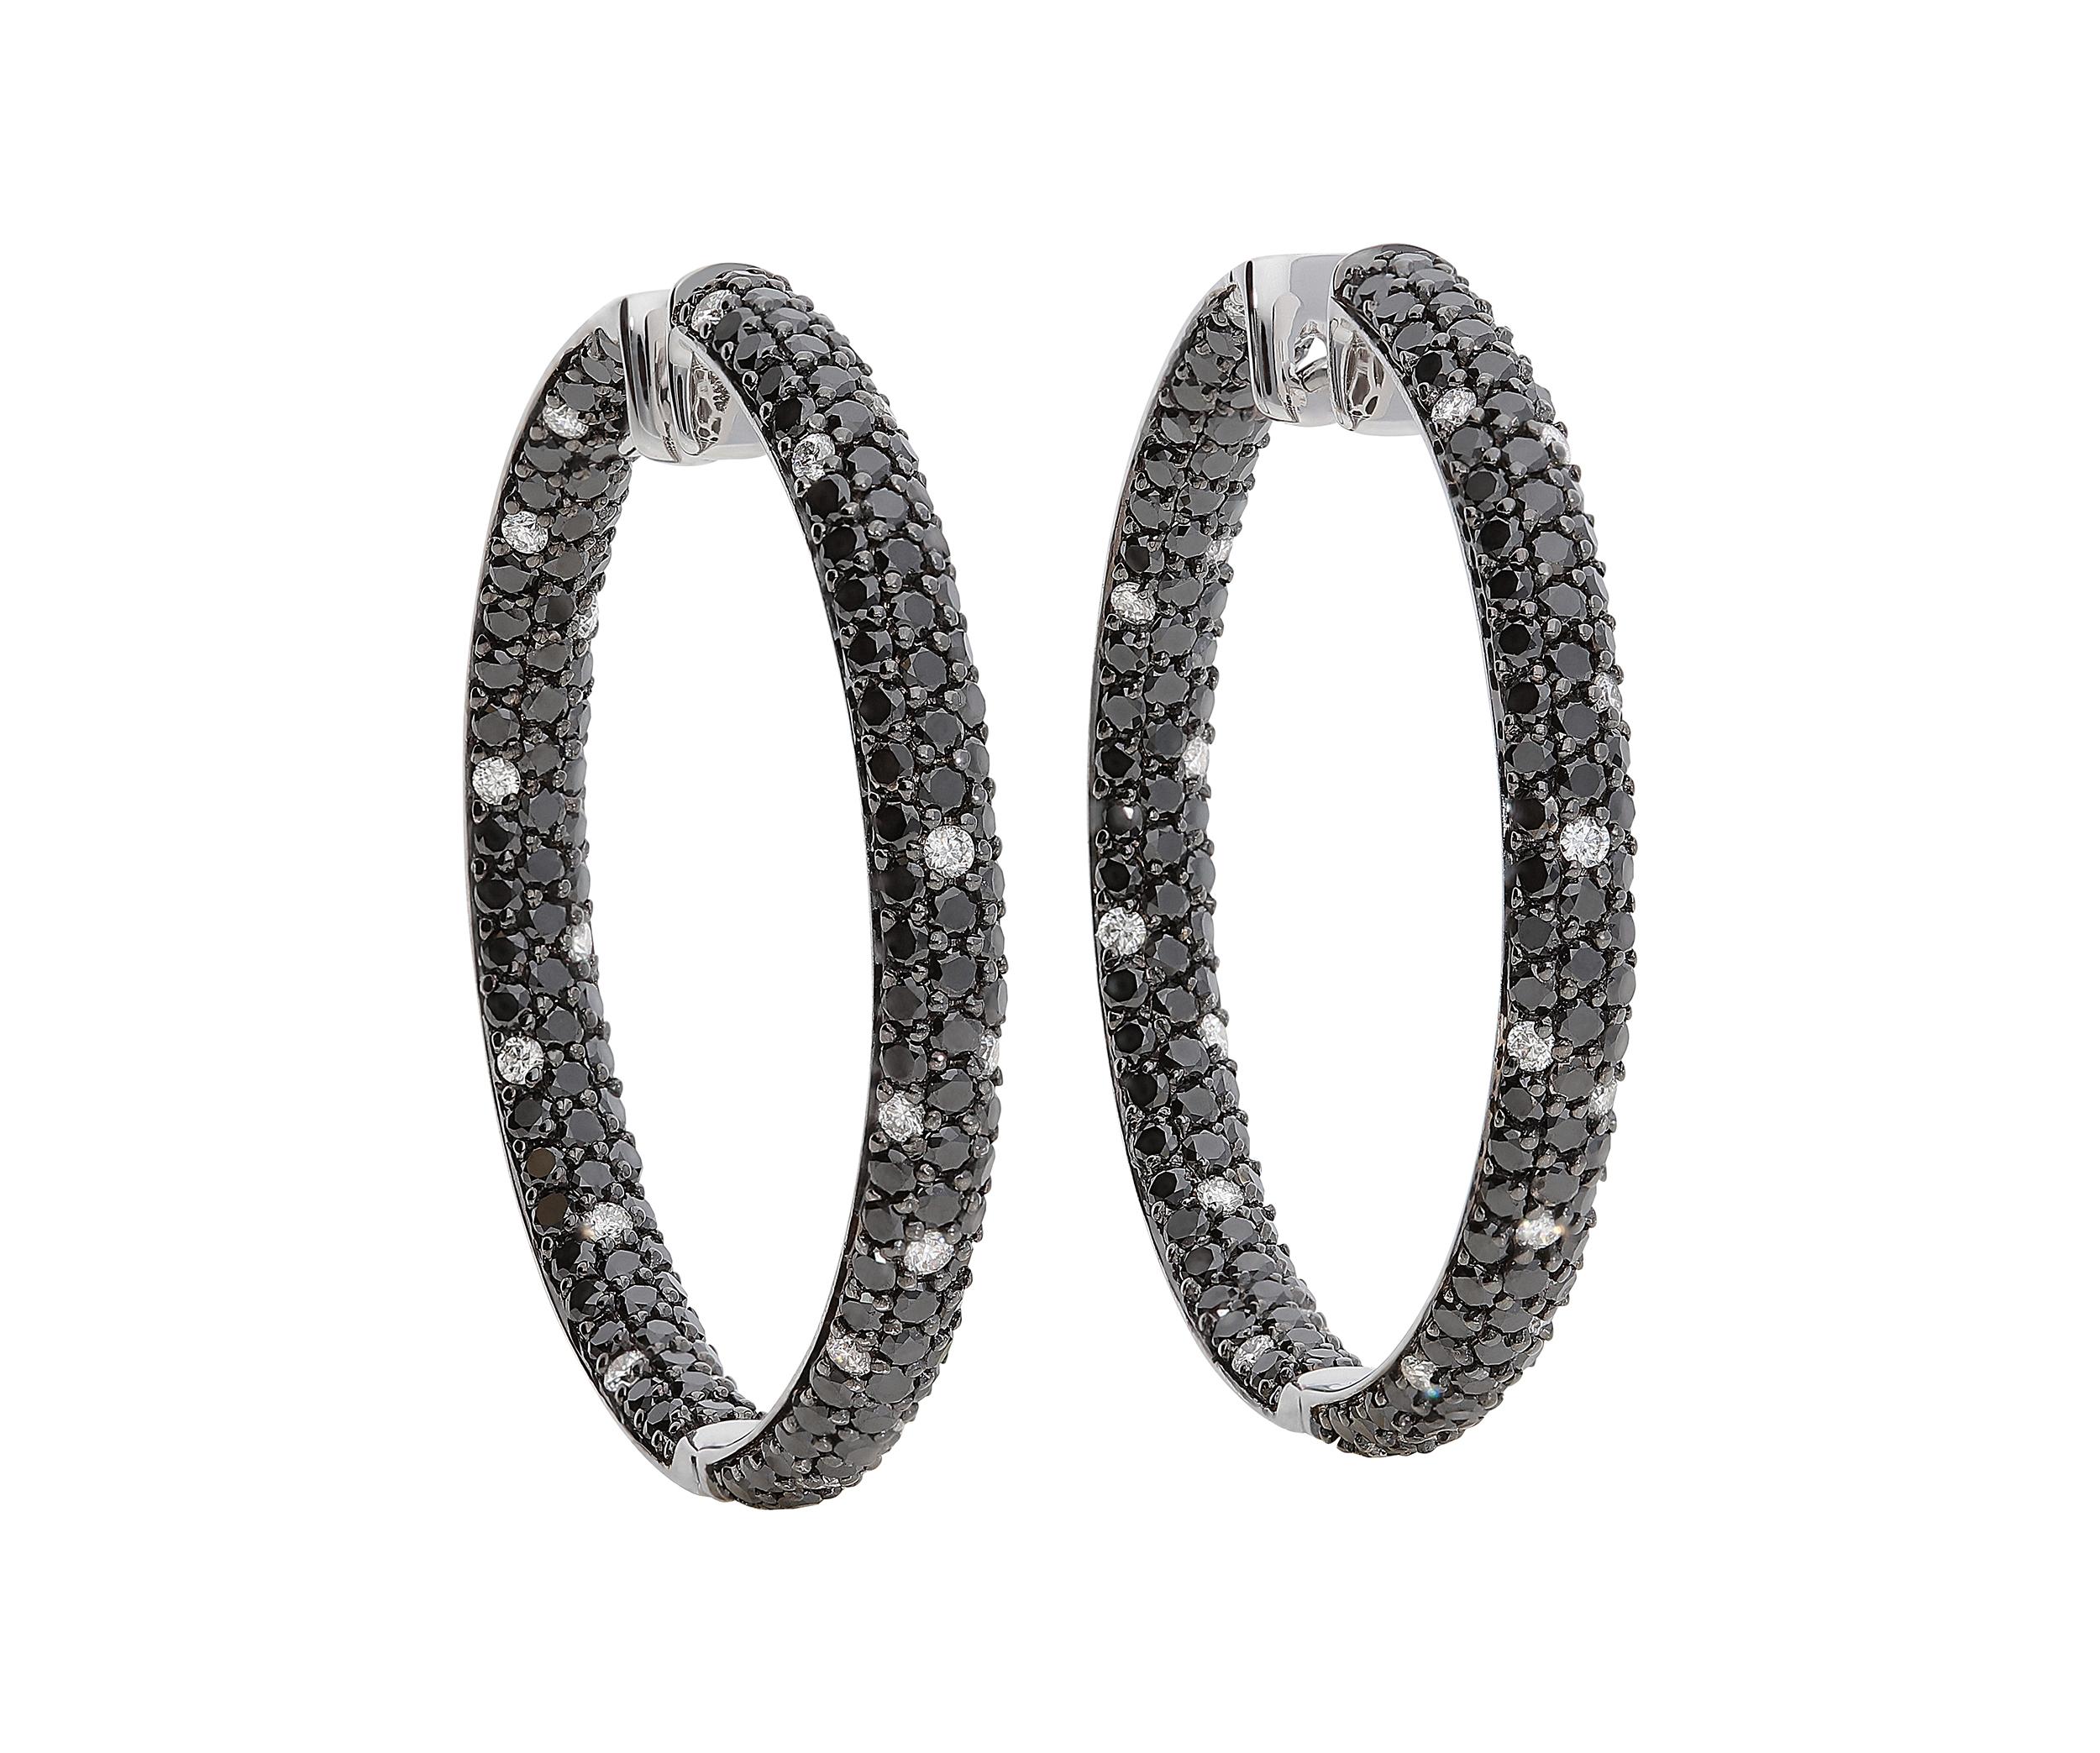 Hoop earrings in 18kt white gold for 7,90 grams with 3,31 carats of black diamonds and 0,42 carats of white round brilliant diamonds color G clarity VS.
The internal diameter of the earrings is 3 centimeters.
As shining stars in the night sky, they